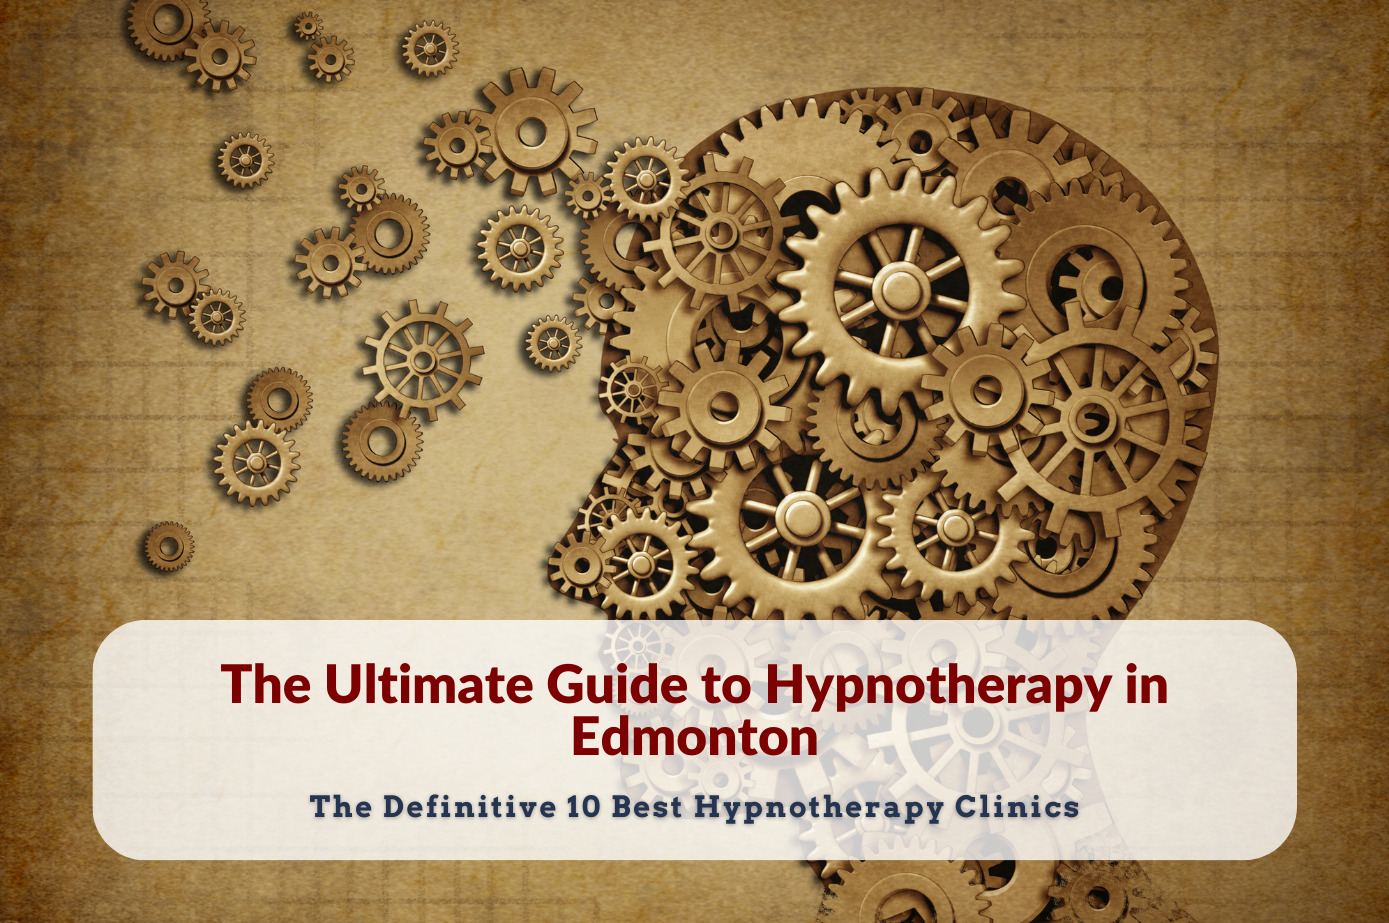 Ultimate Guide to Hypnotherapy in Edmonton: The Definitive Top 10 Hypnotherapy Clinics